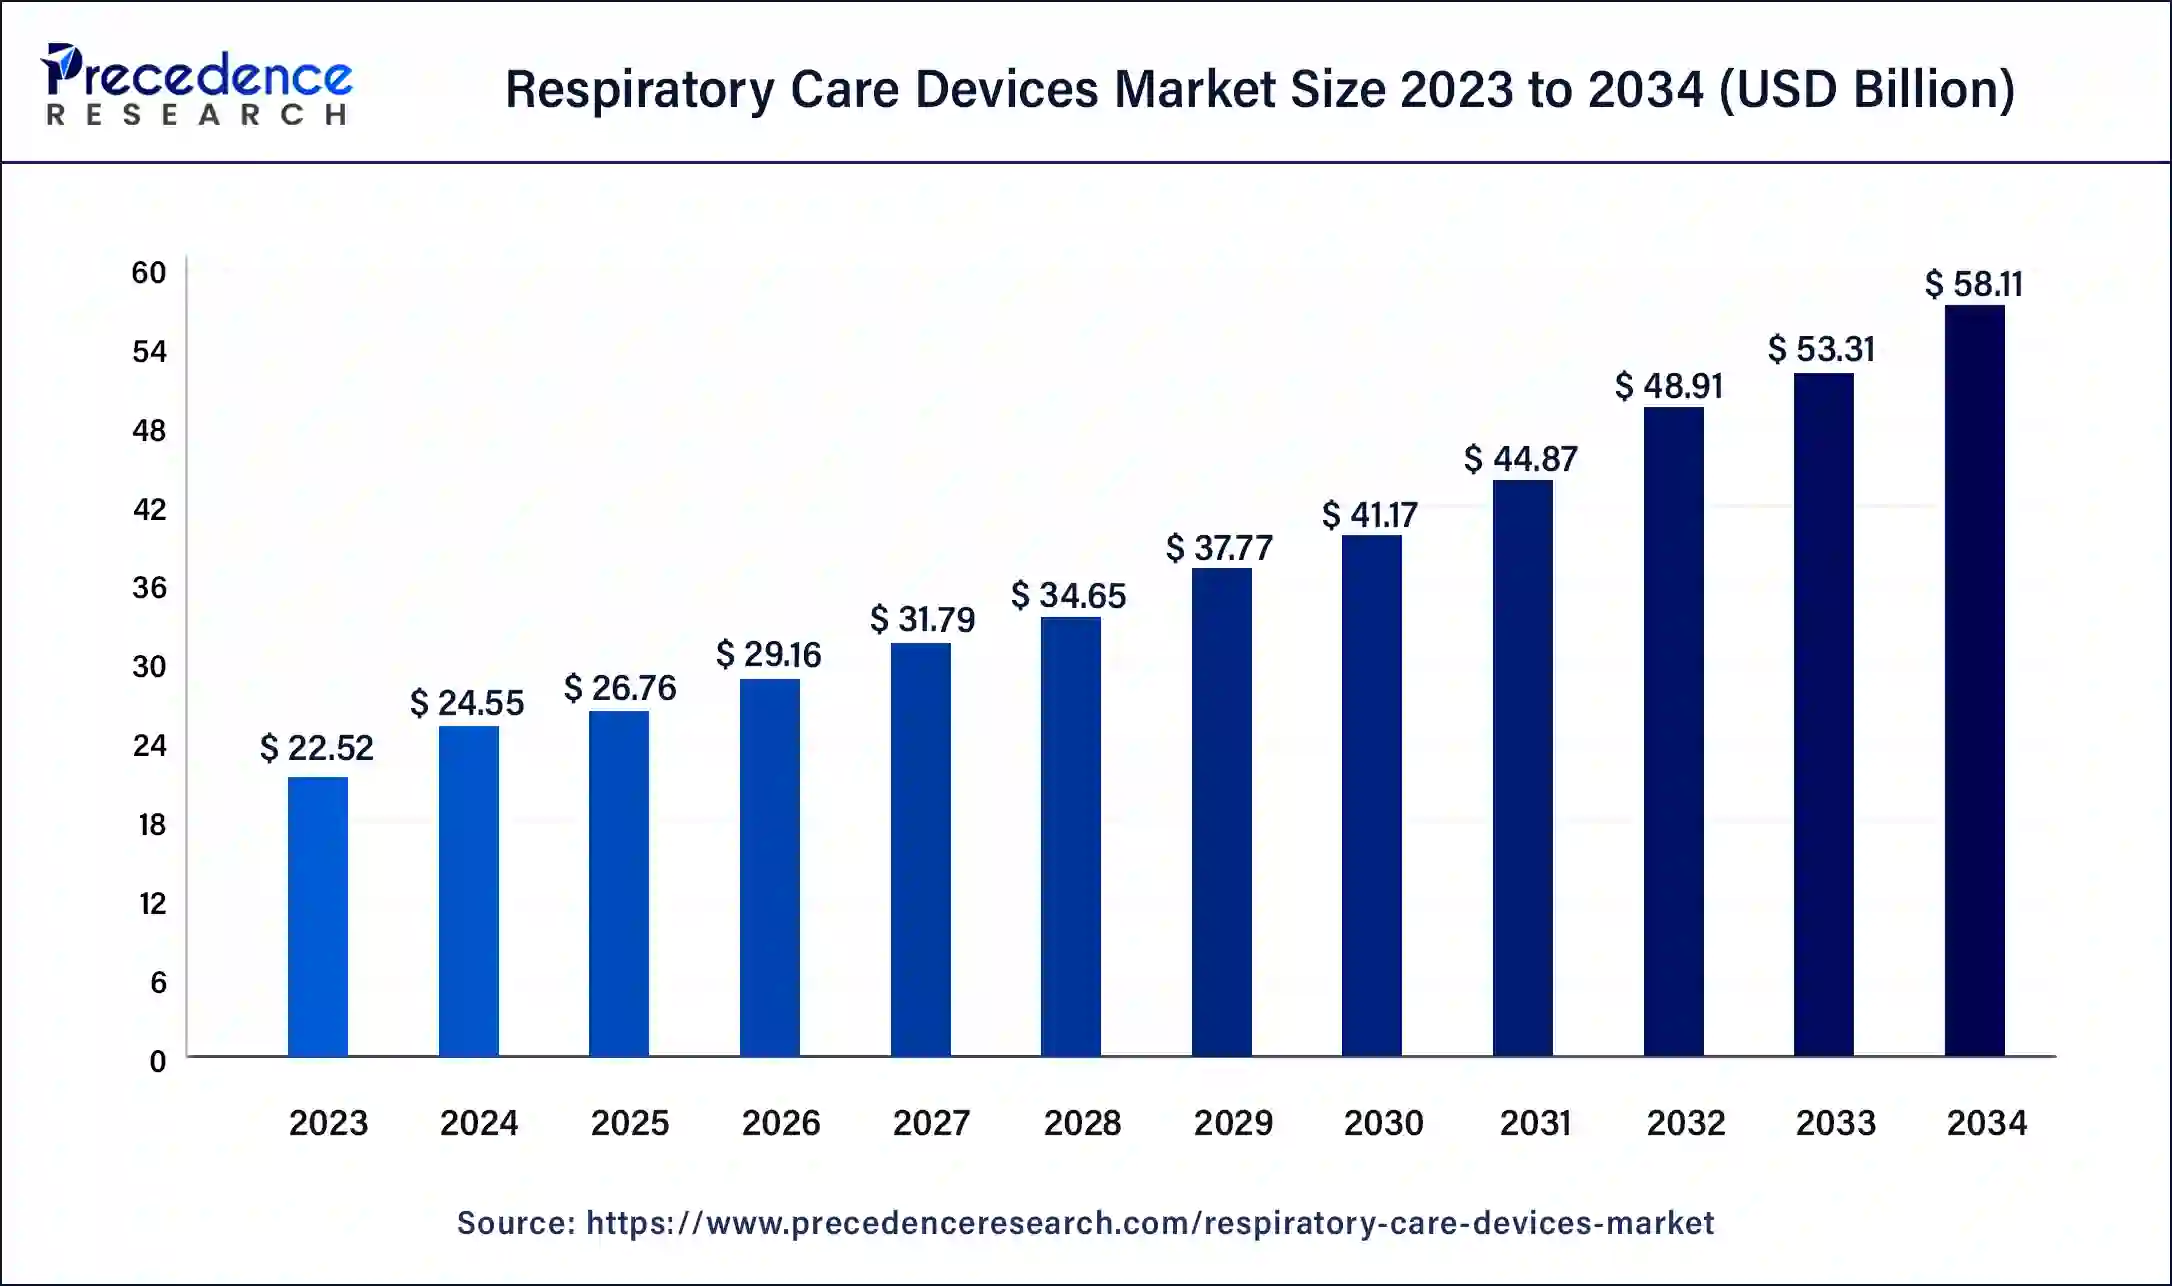 Respiratory Care Devices Market Size 2024 to 2034